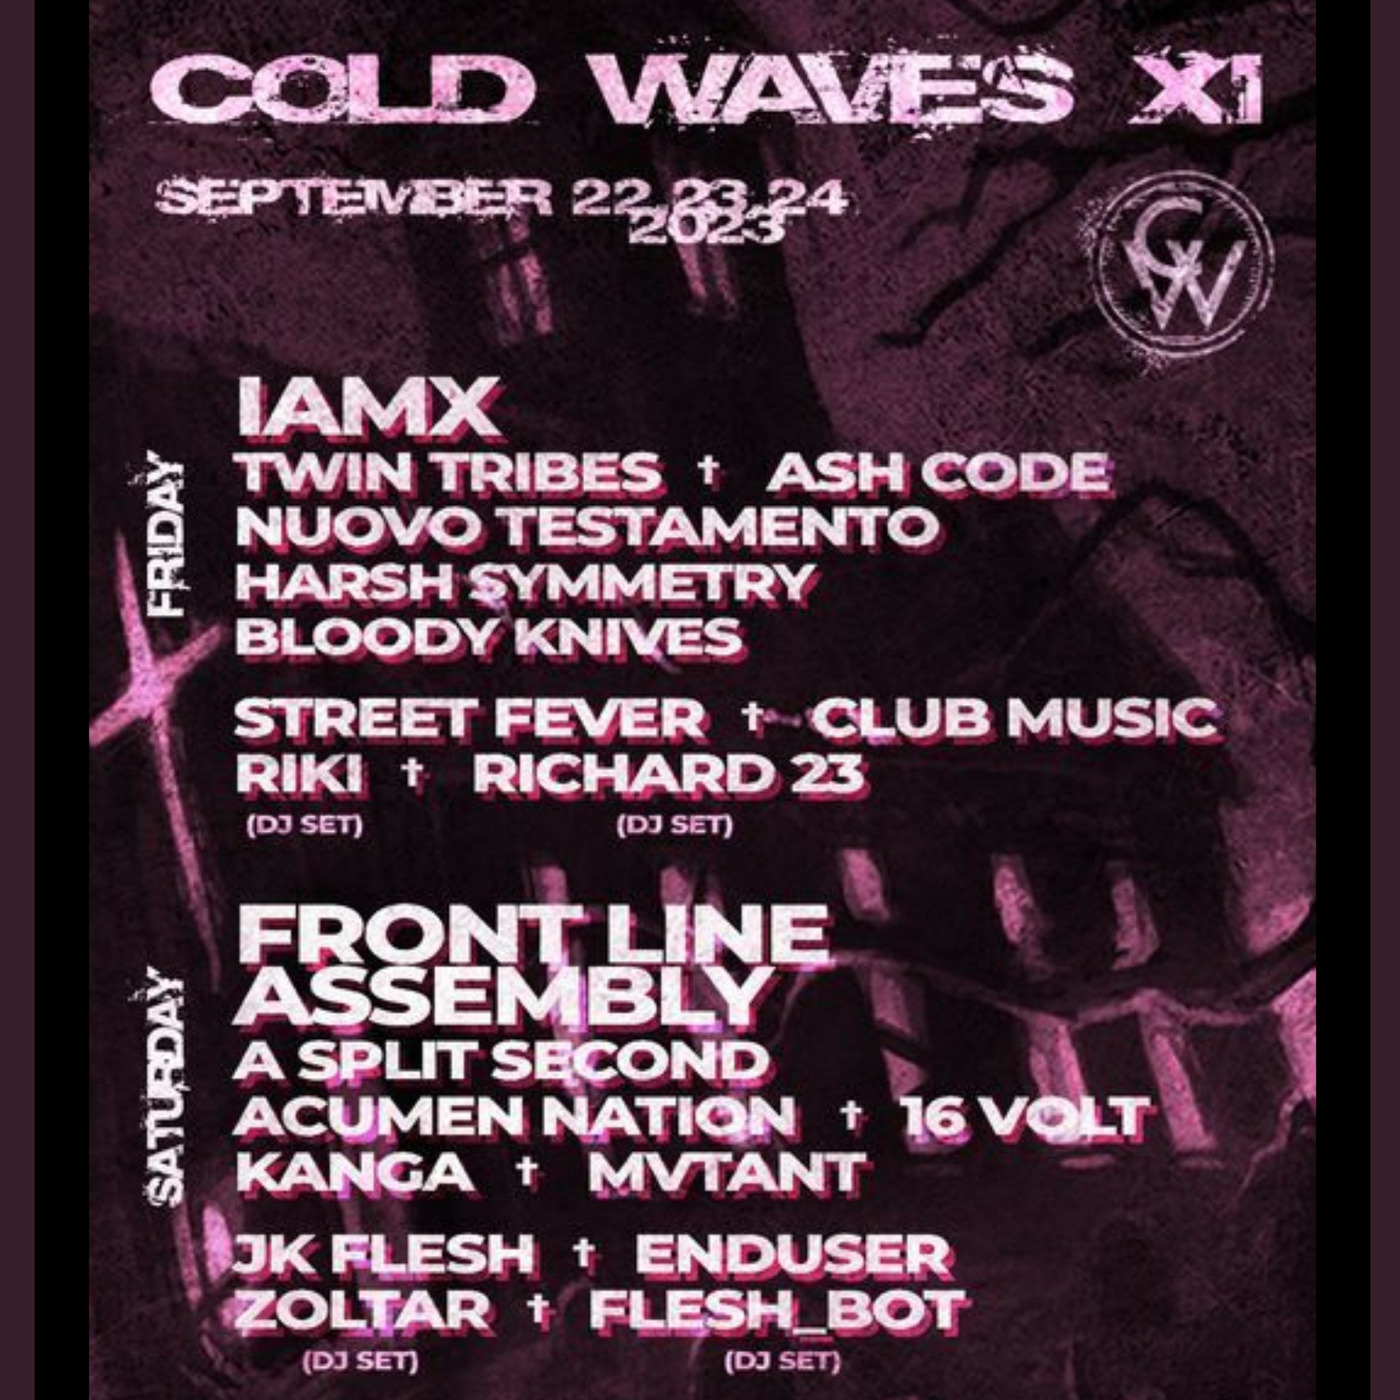 CHICAGO COLD WAVES 2023 // Industrial Set